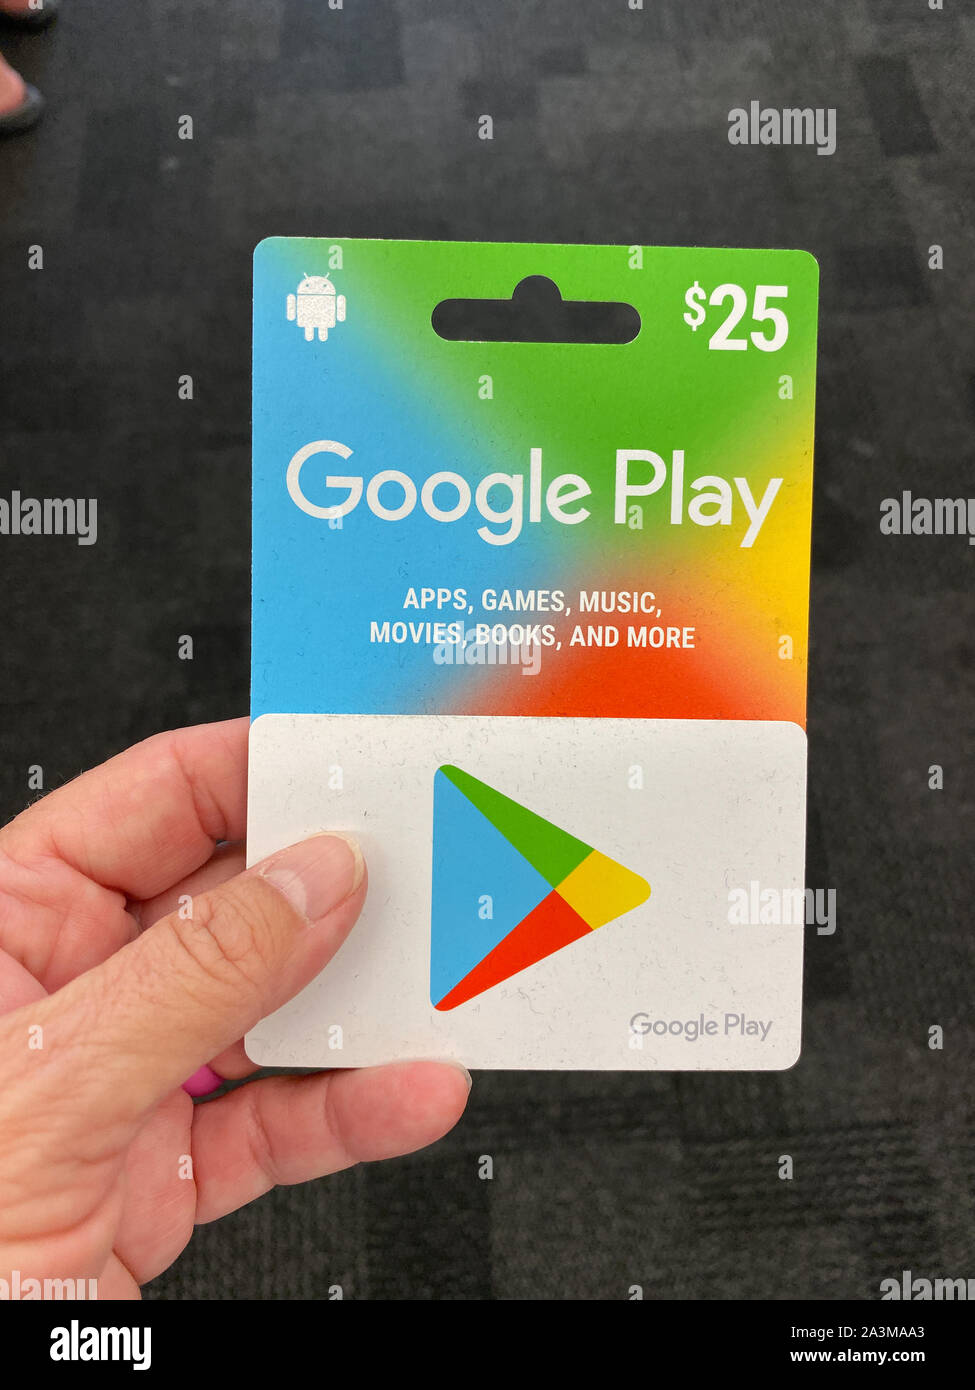 What to Do With Google Play Gift Card 